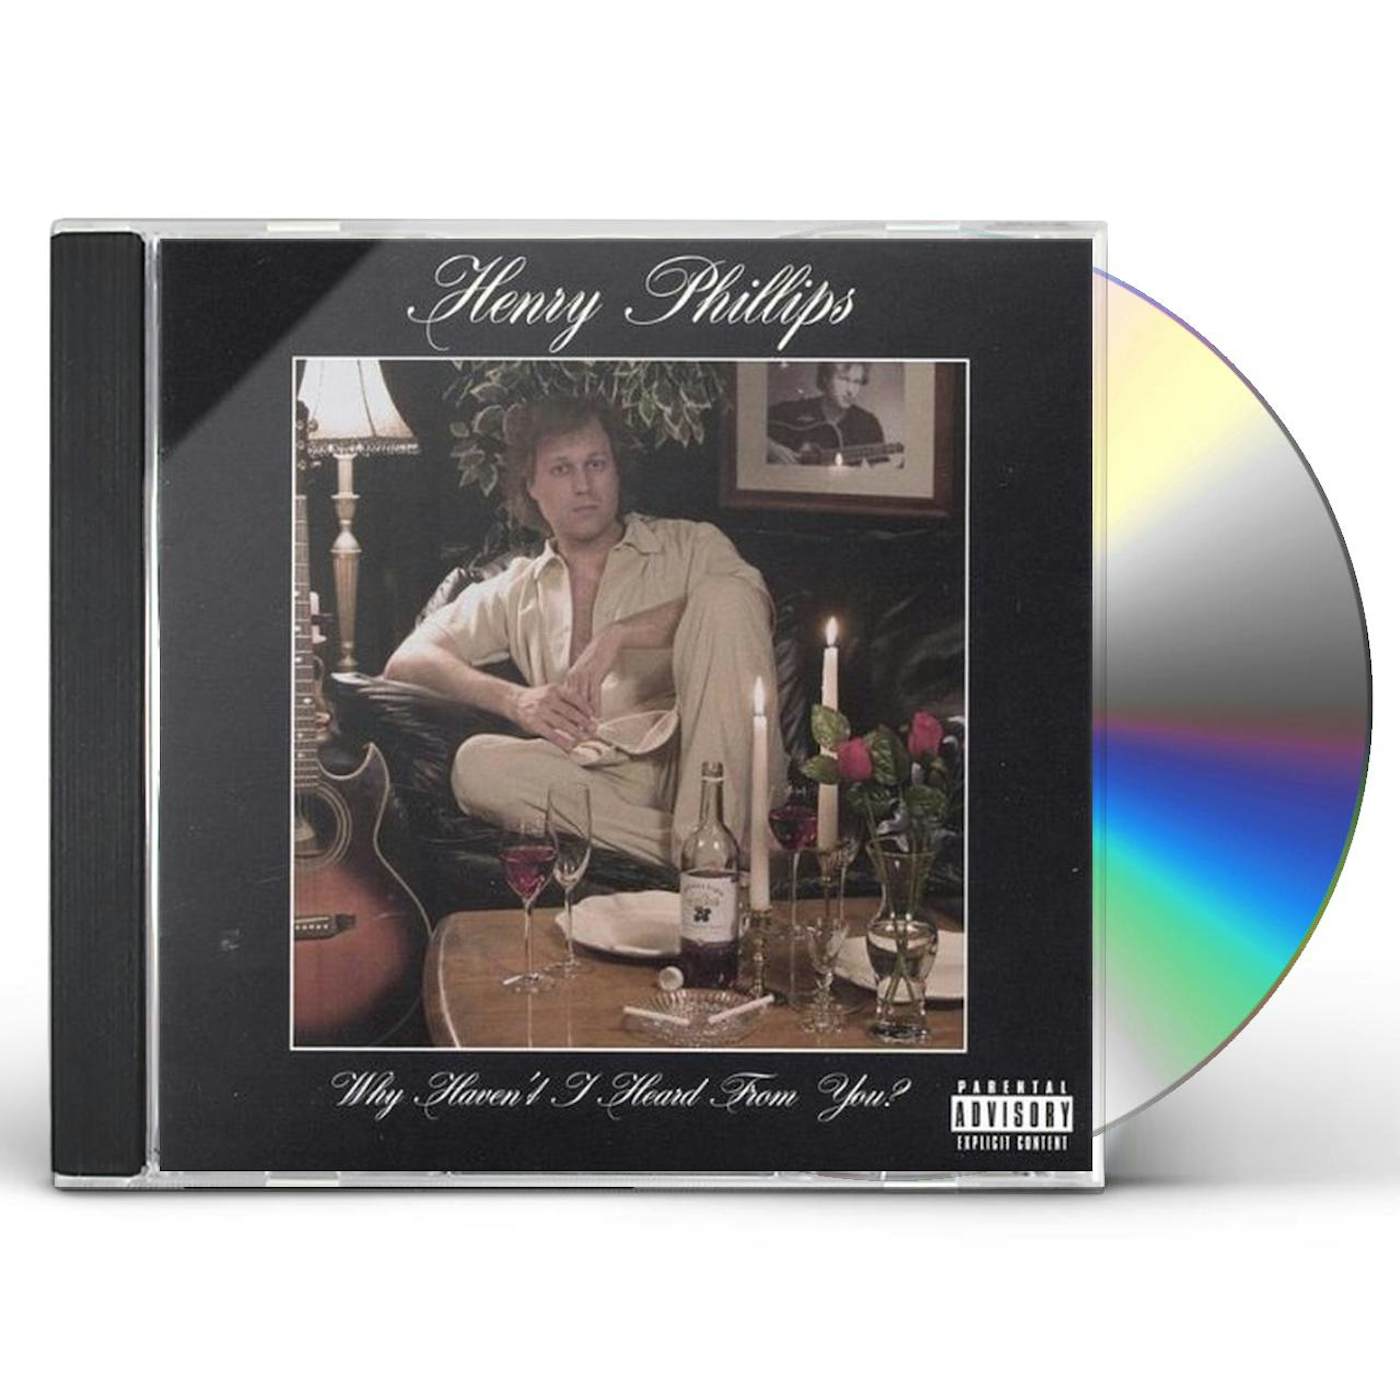 Henry Phillips WHY HAVEN'T I HEARD FROM YOU CD